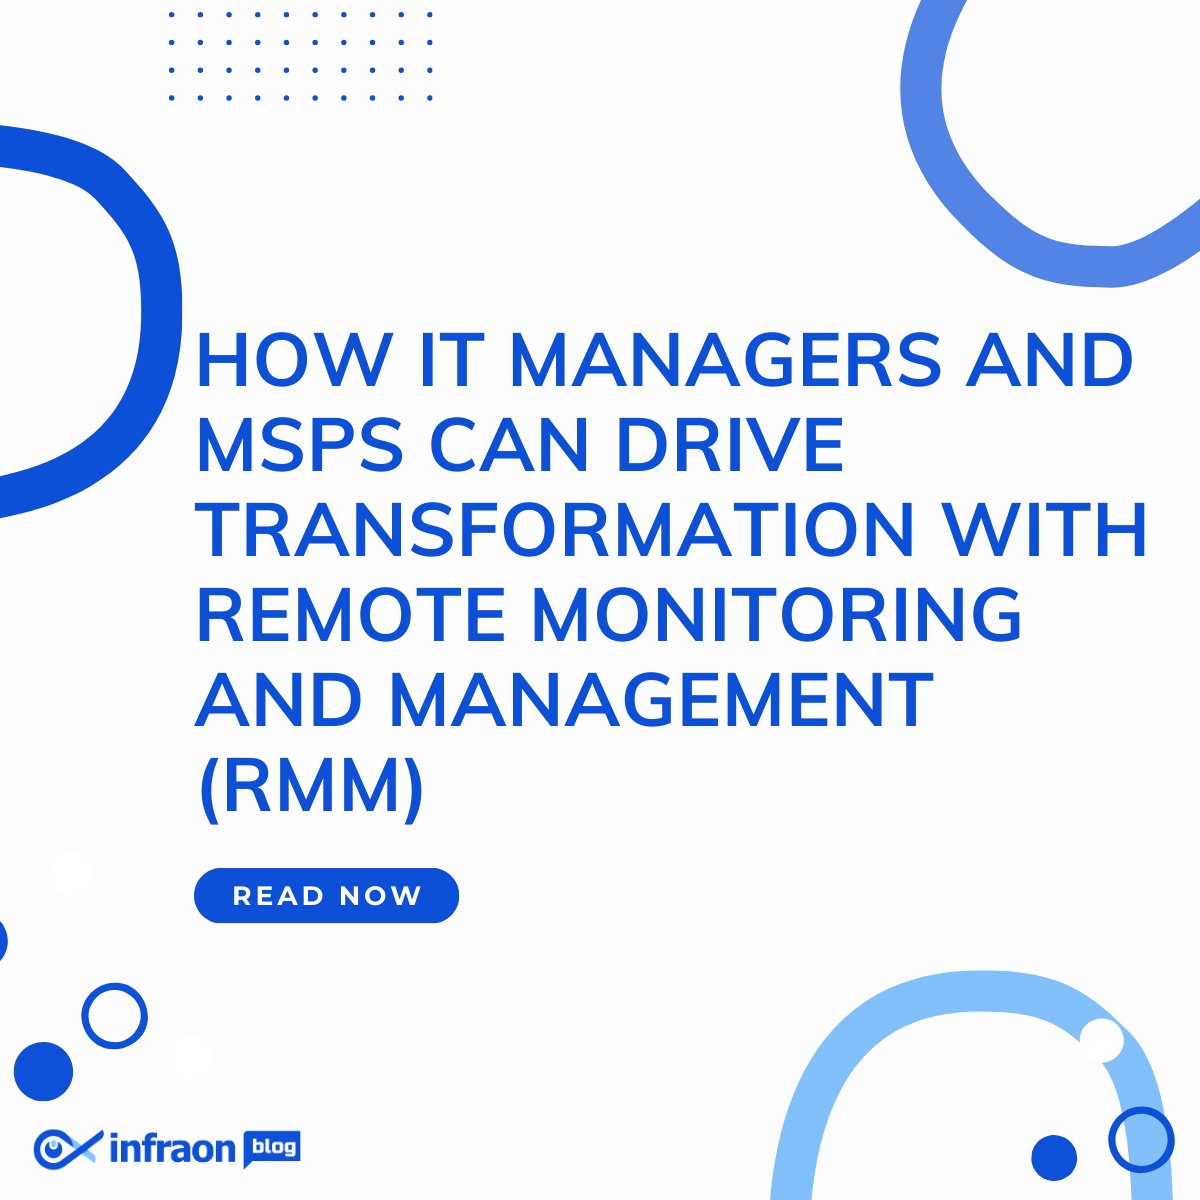 Managed Service Providers (#MSPs) are seriously shaking things up in IT management.  Read the blog here...bit.ly/3OyH5LG 

#infraon #saas #saasproducts #itsm #assetmanagement #itam